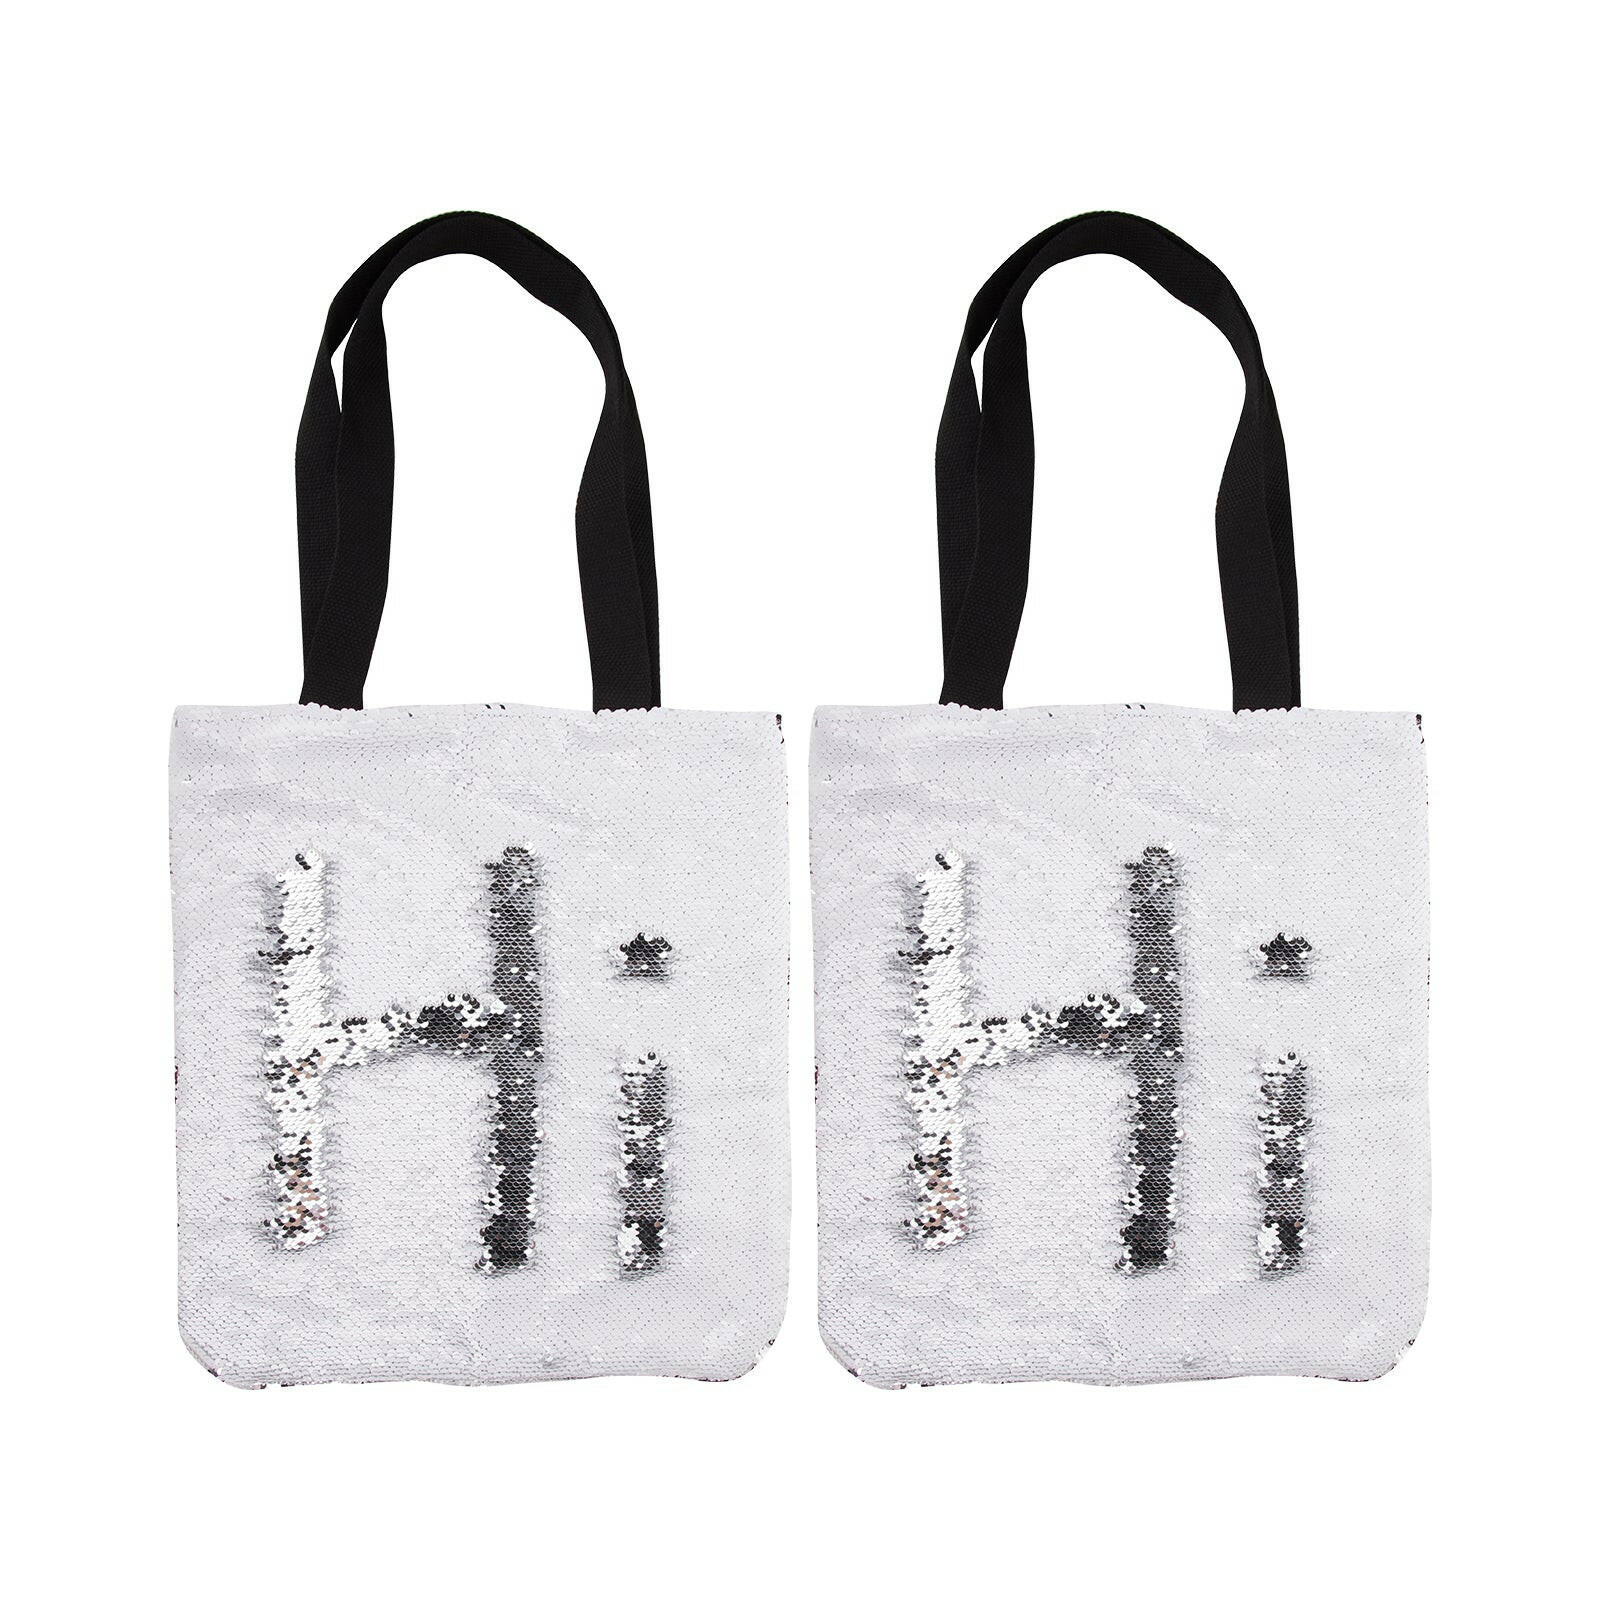 Sublimation Sequin Tote Bags - 2 Pack.